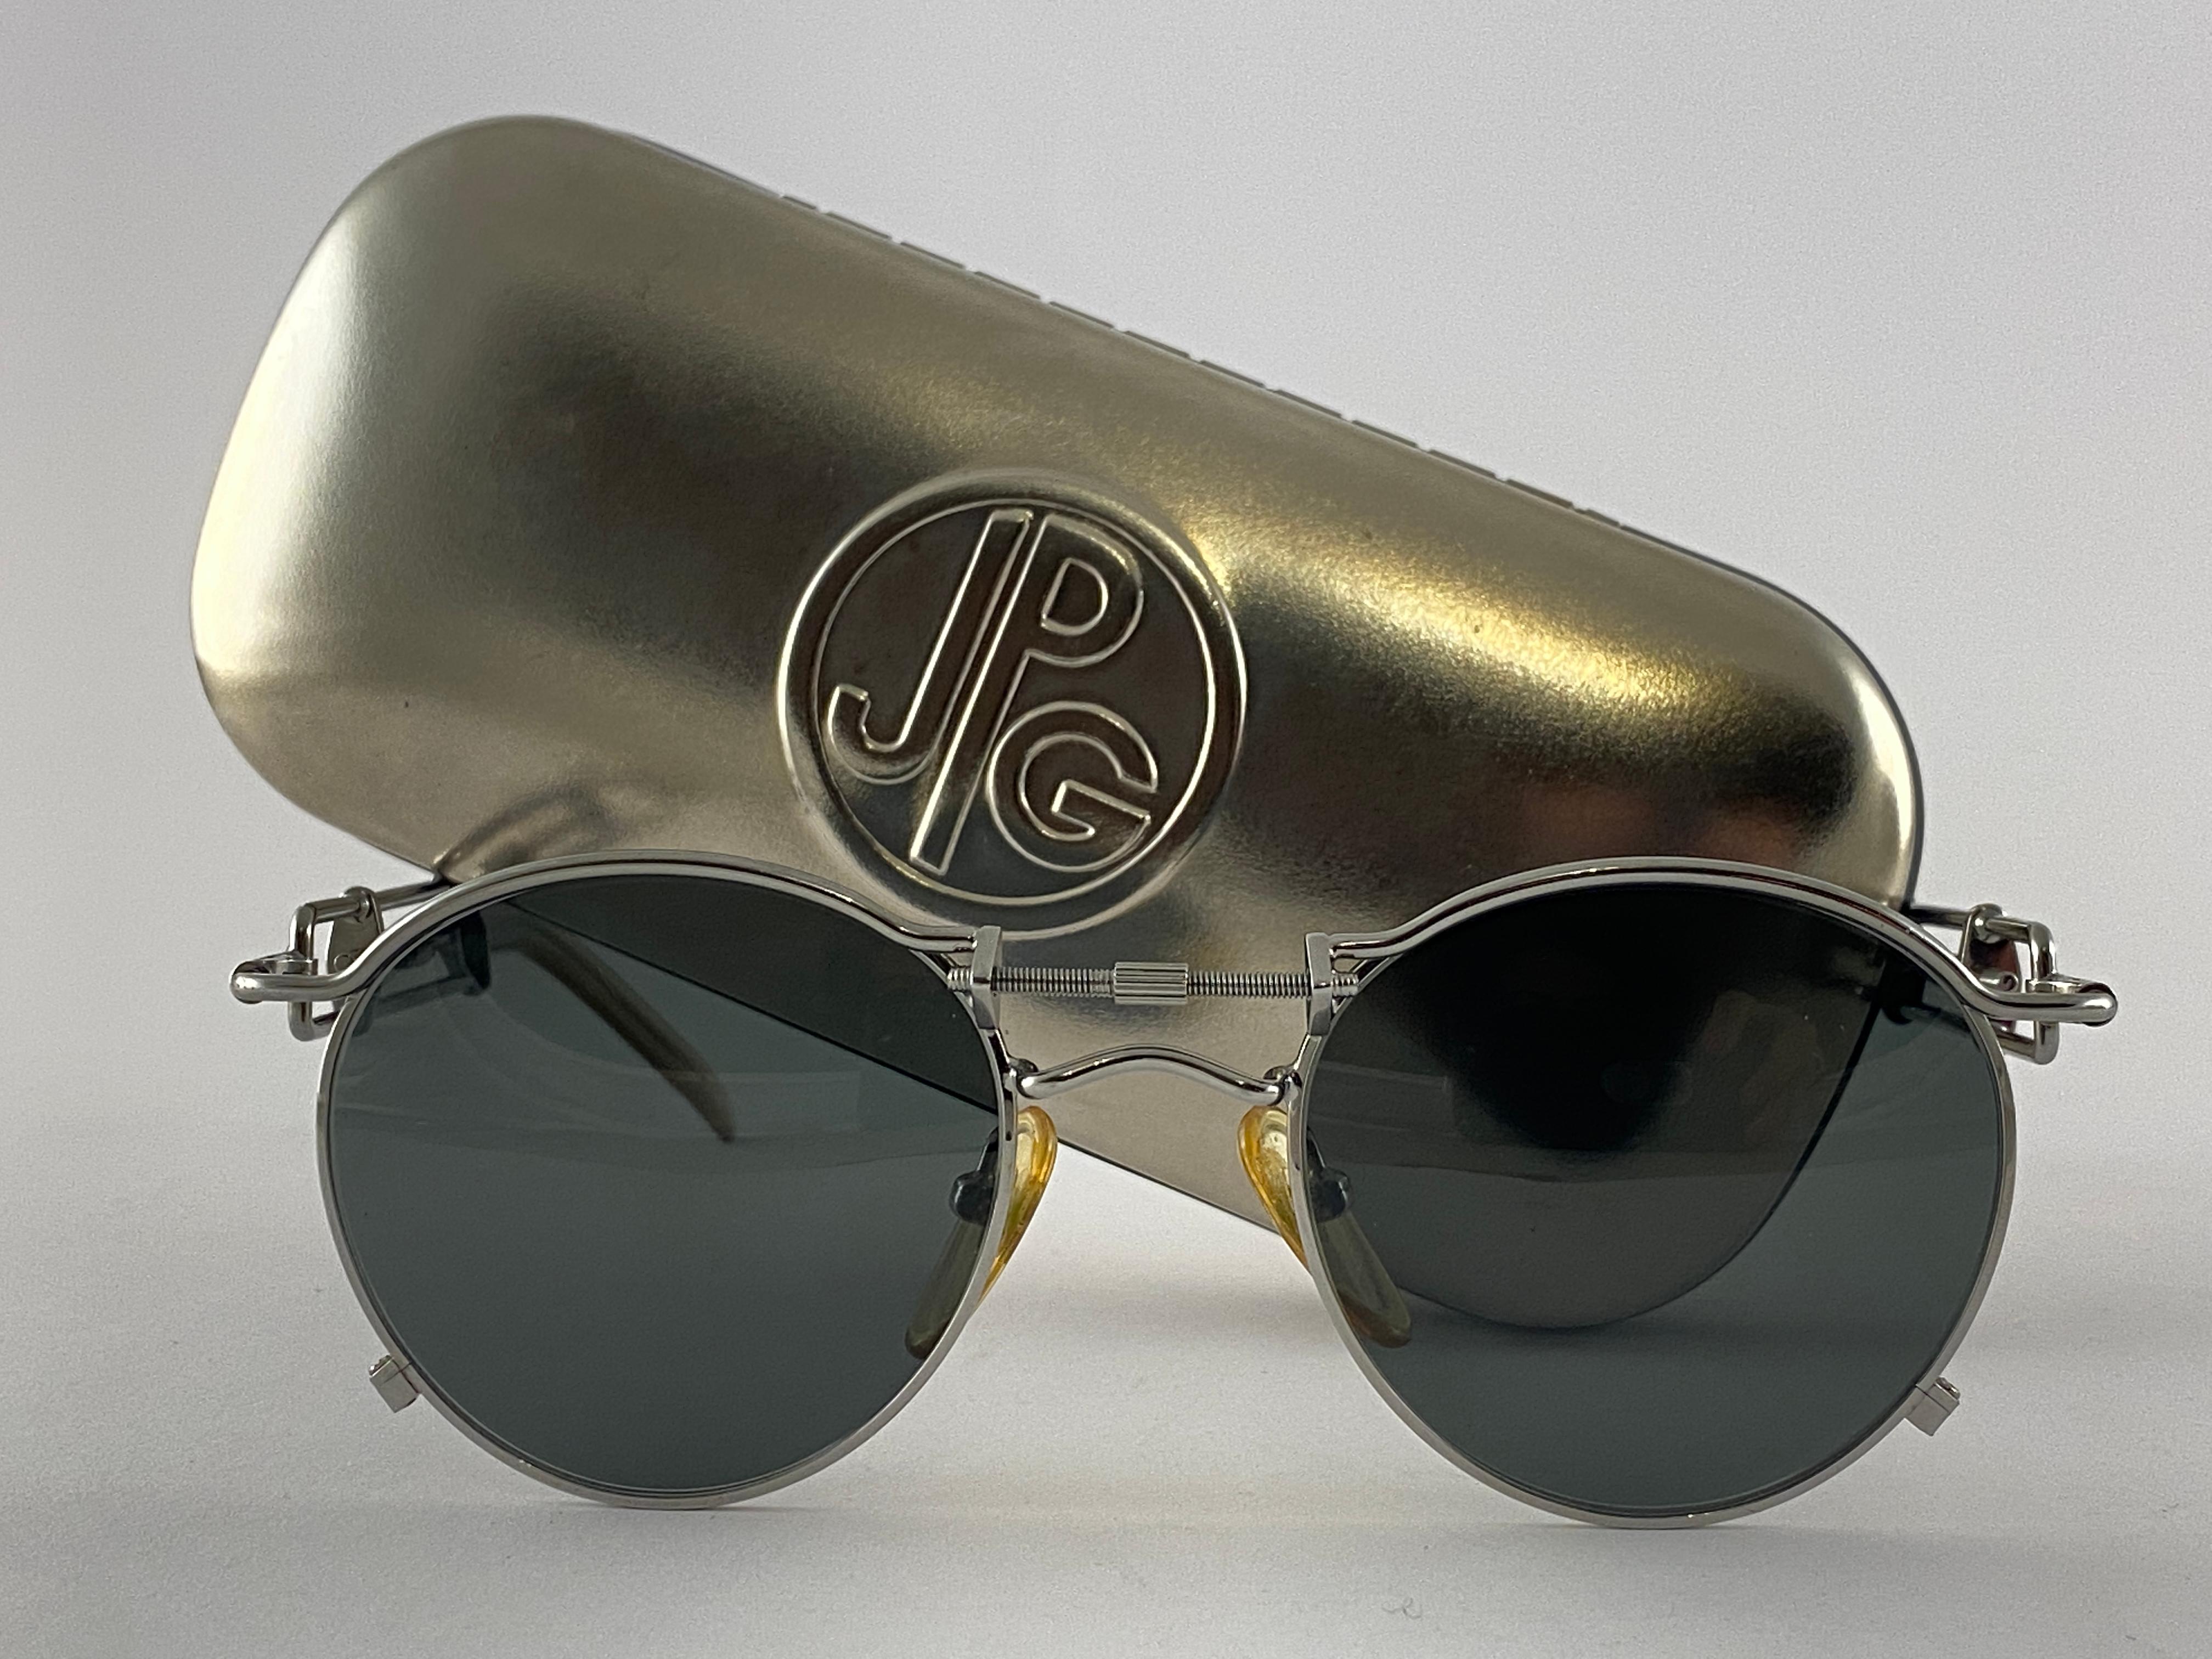 Vintage Jean Paul Gaultier 56 0174 Silver Details frame. 
Dark grey lenses that complete a ready to wear JPG look.

Amazing design with strong yet intricate details.
Design and produced in the 1900's.
Minor sign of wear due to storage on the acetate